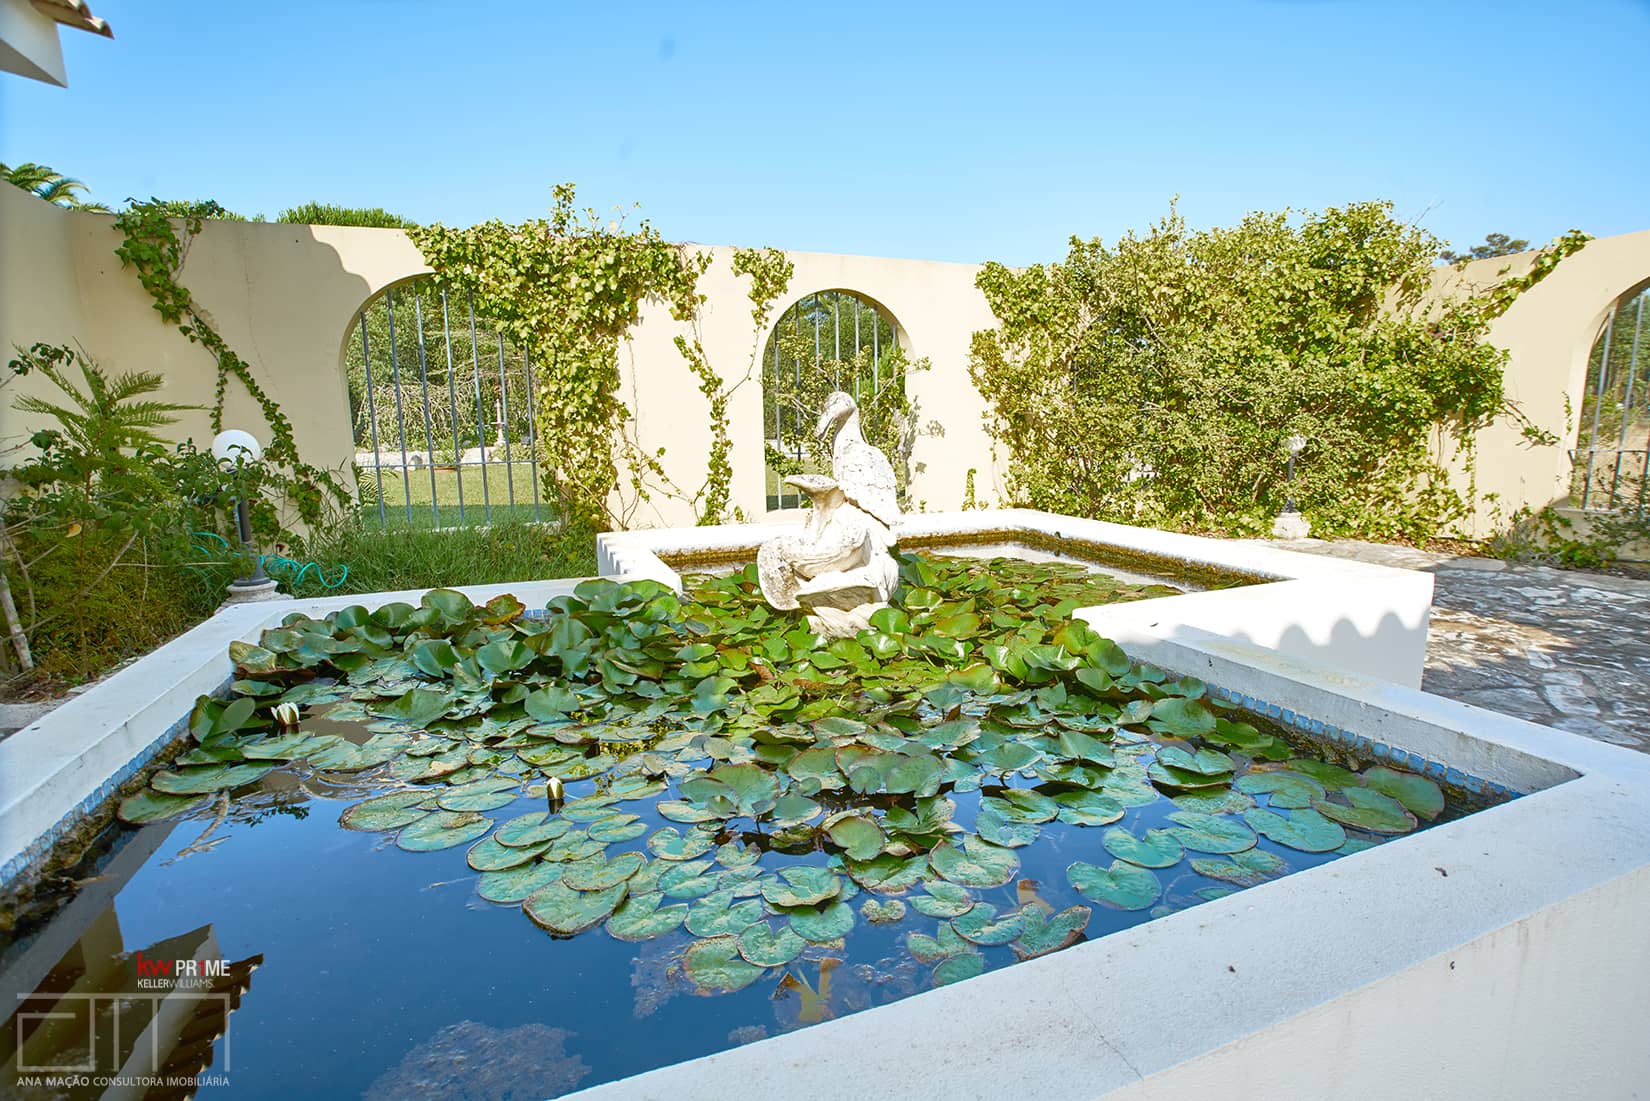 Water lily pond with figurine